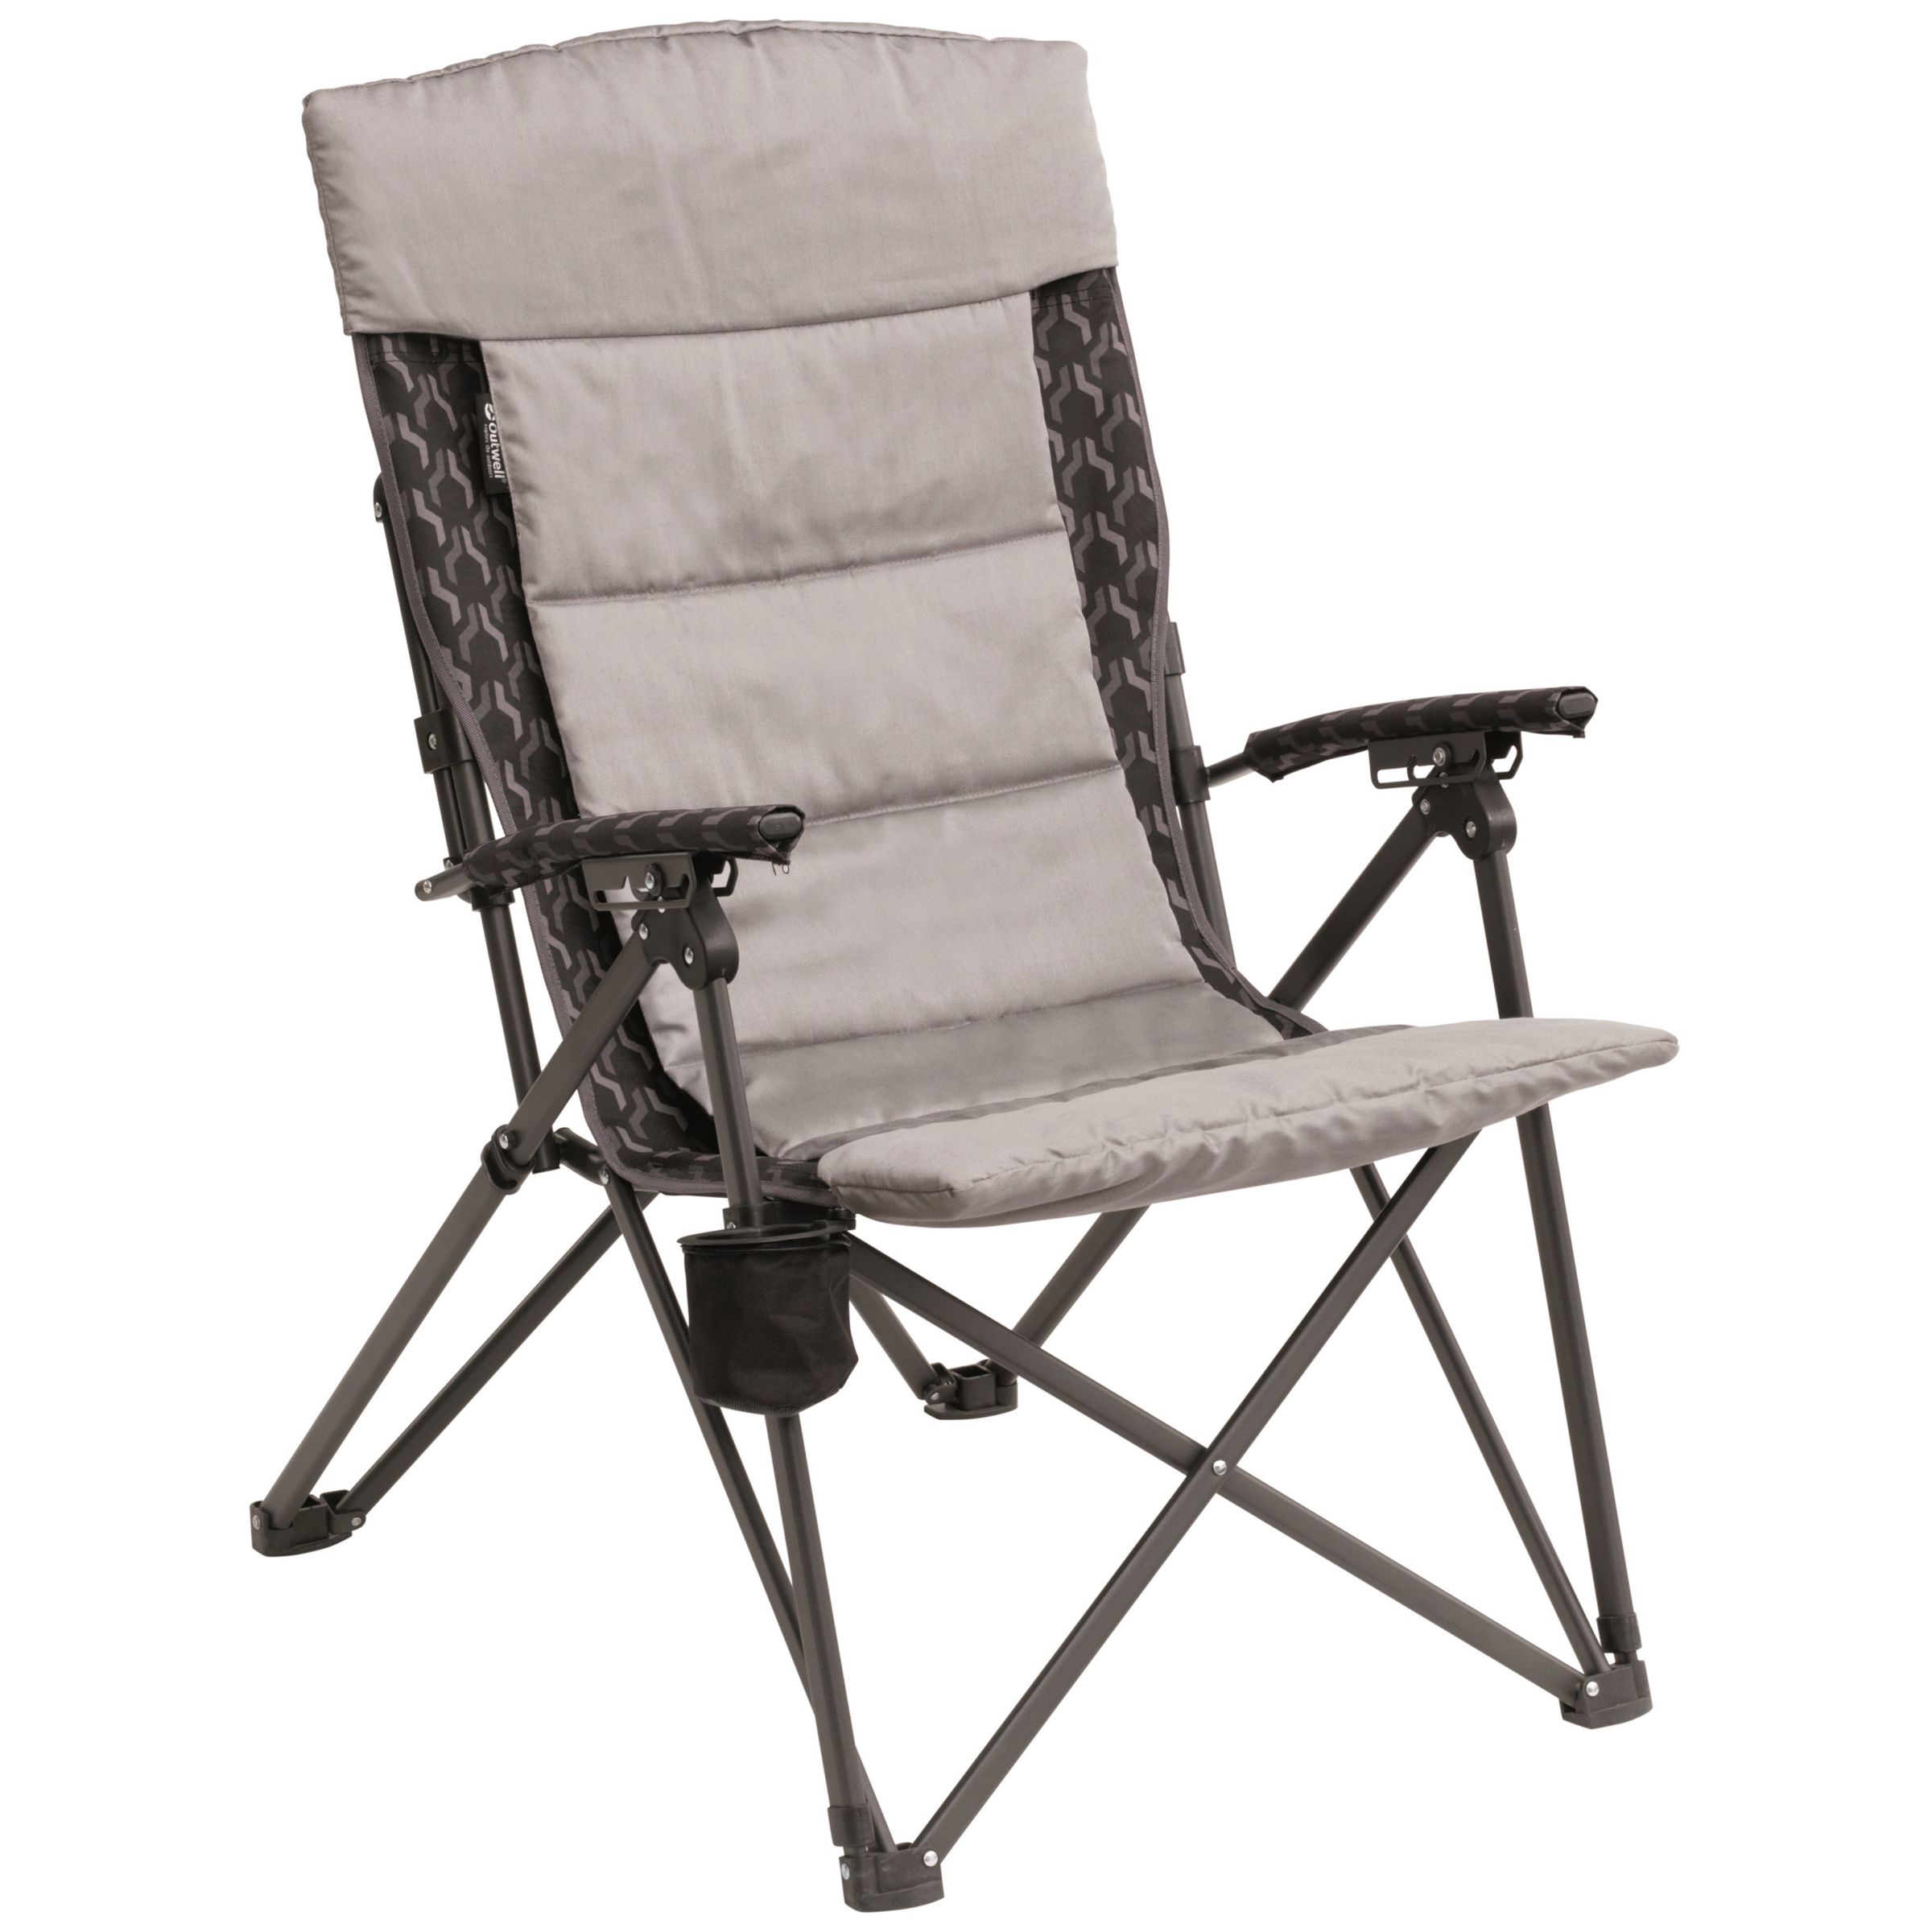 outwell weston hills chair